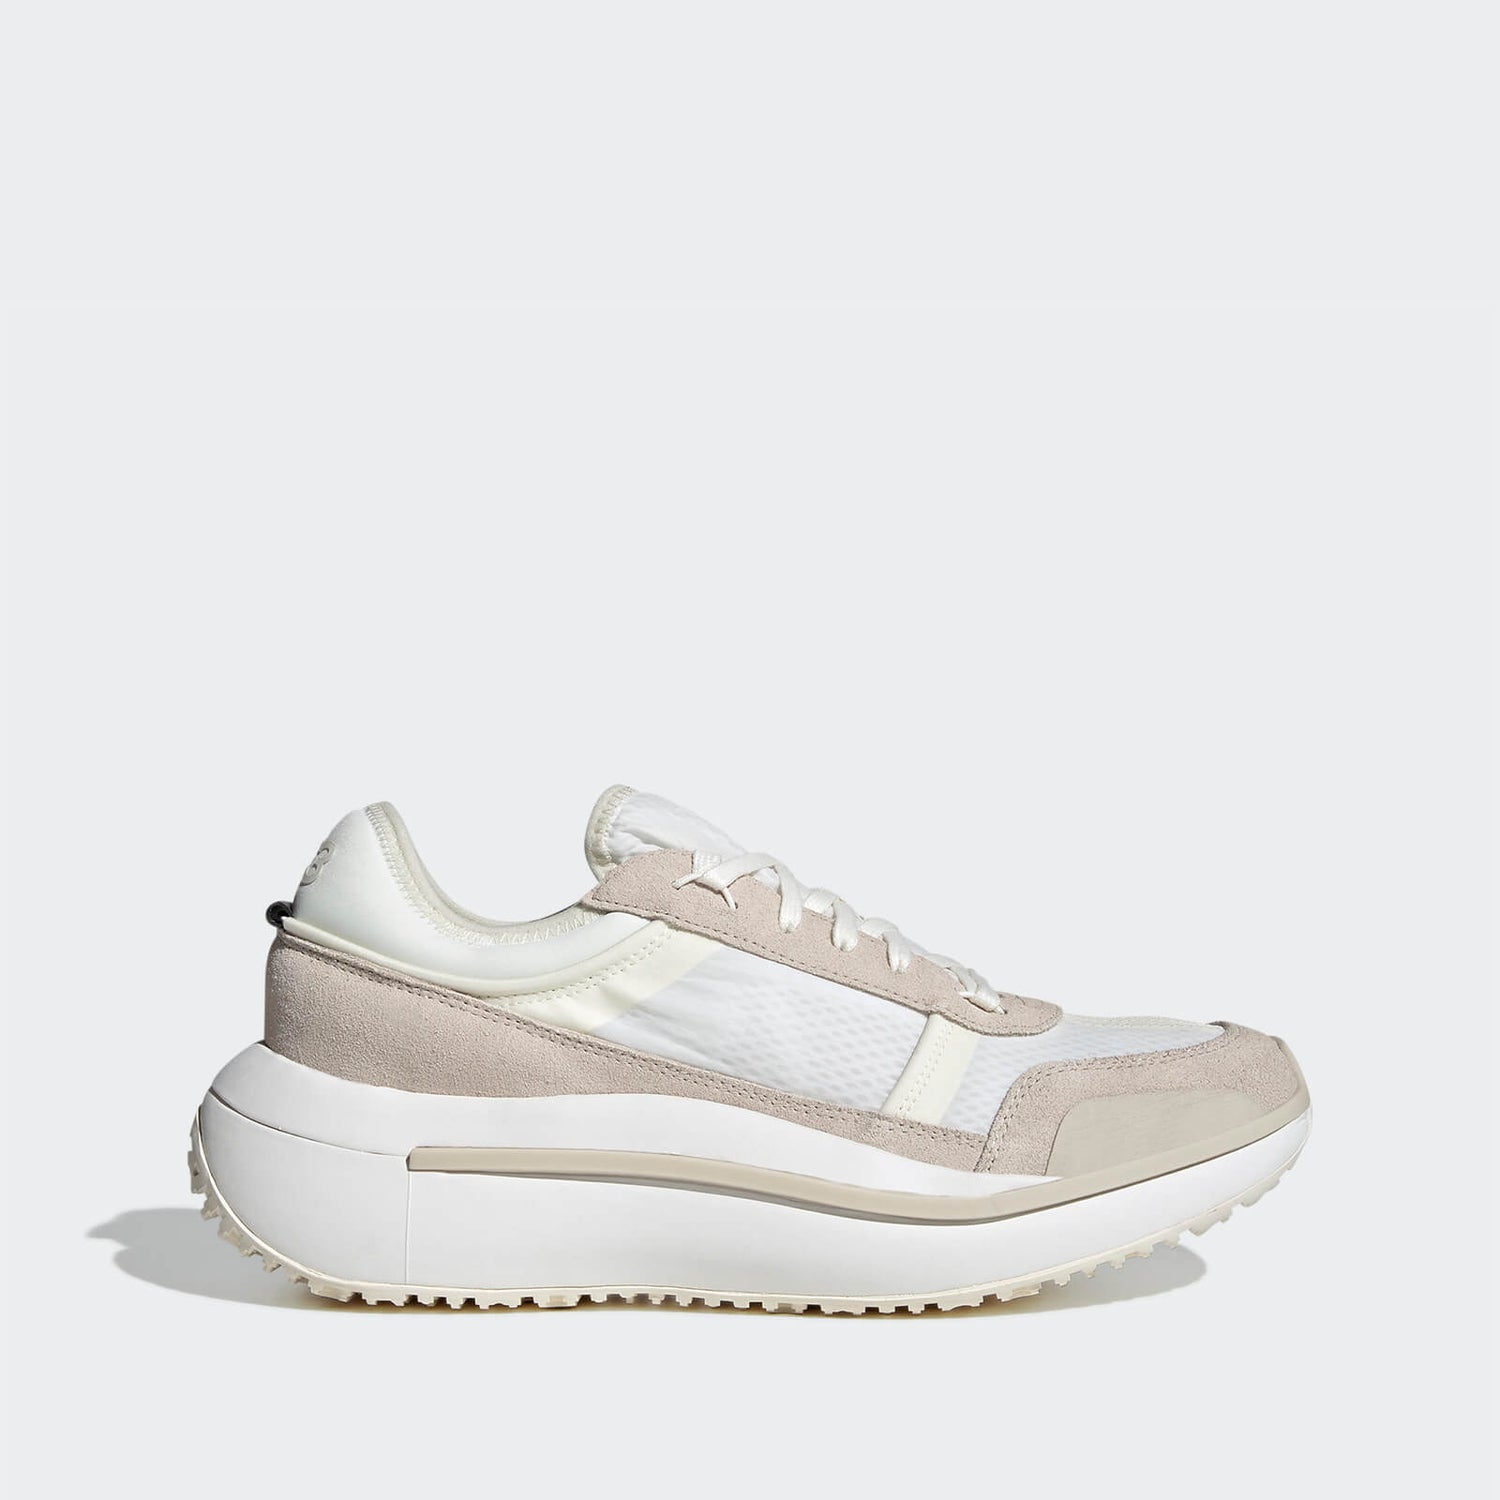 Y-3 Men's Classic Run Sneakers - Offwhite/Cleabrown/Core White